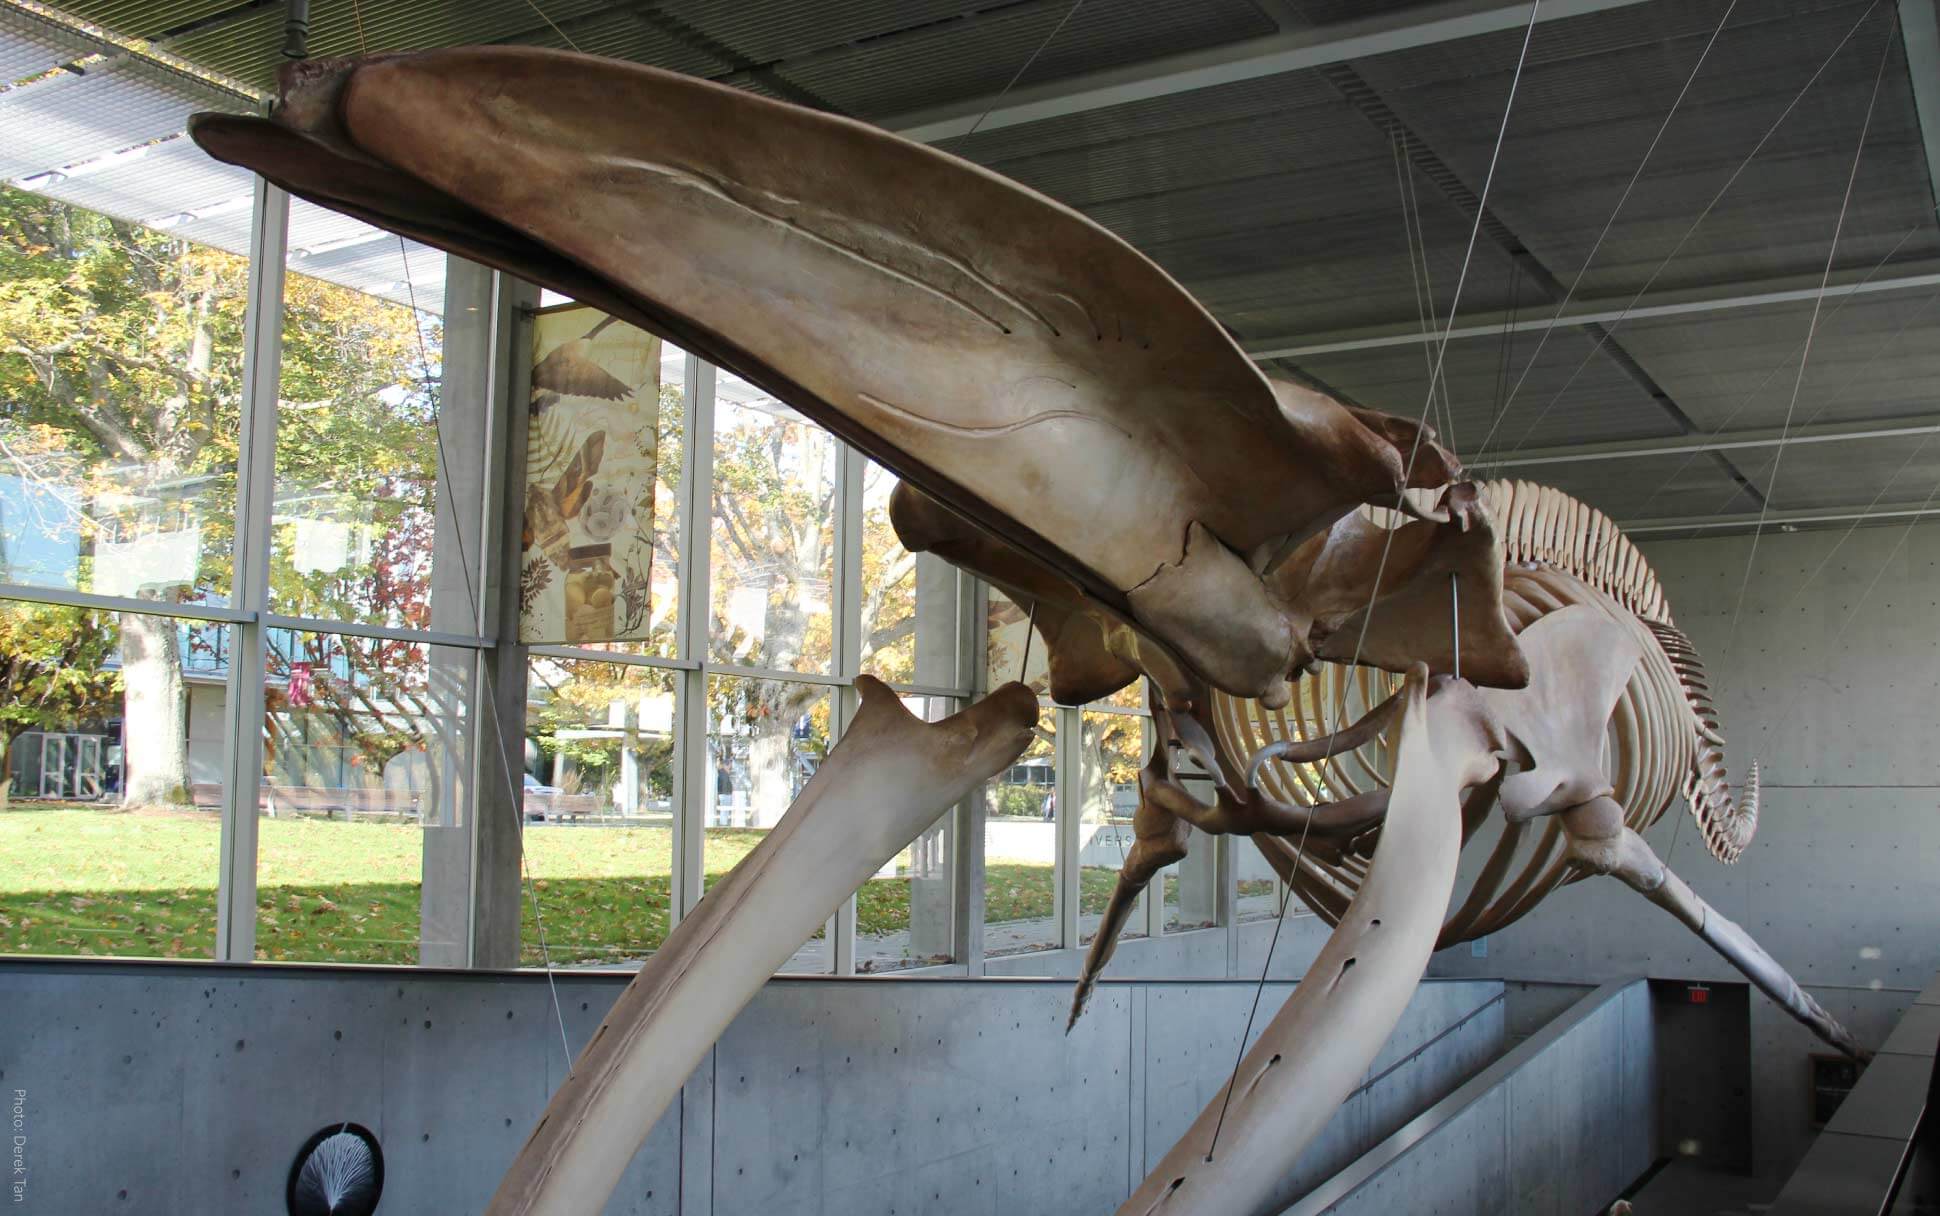 A blue whale skeleton at the family friendly Beaty Biodiversity Museum at UBC